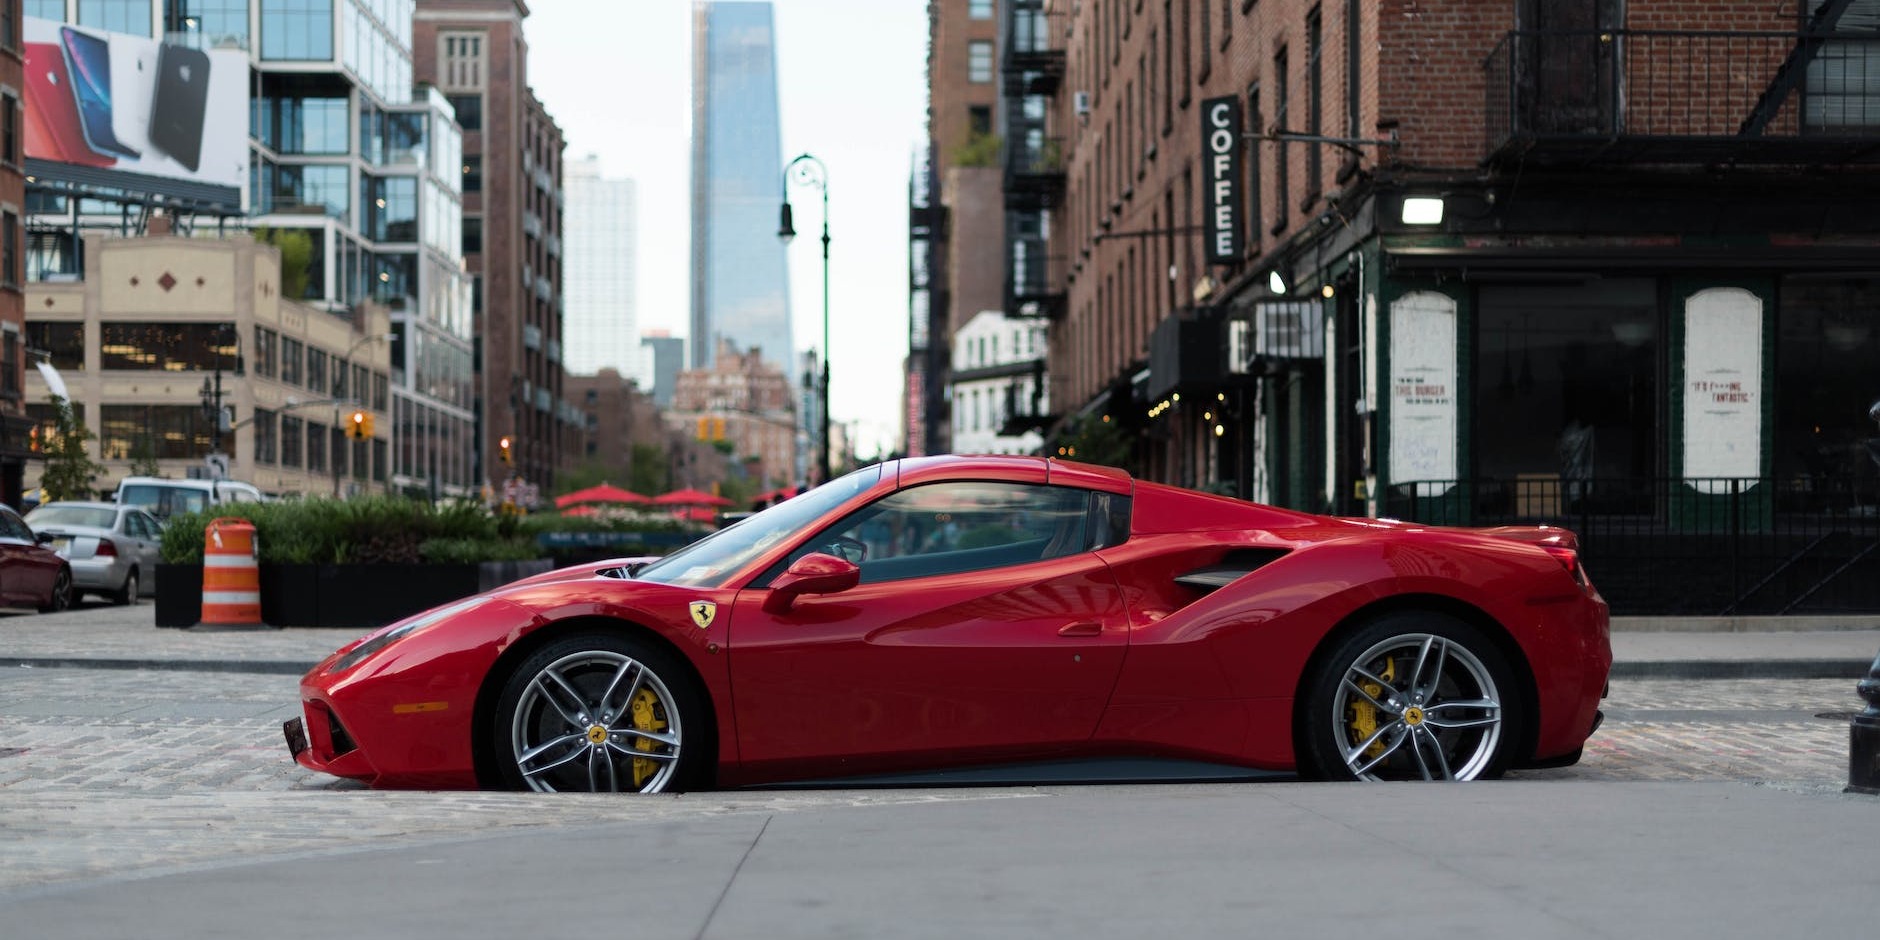 What You Need to Know About Hiring a Ferrari for a Weekend Getaway